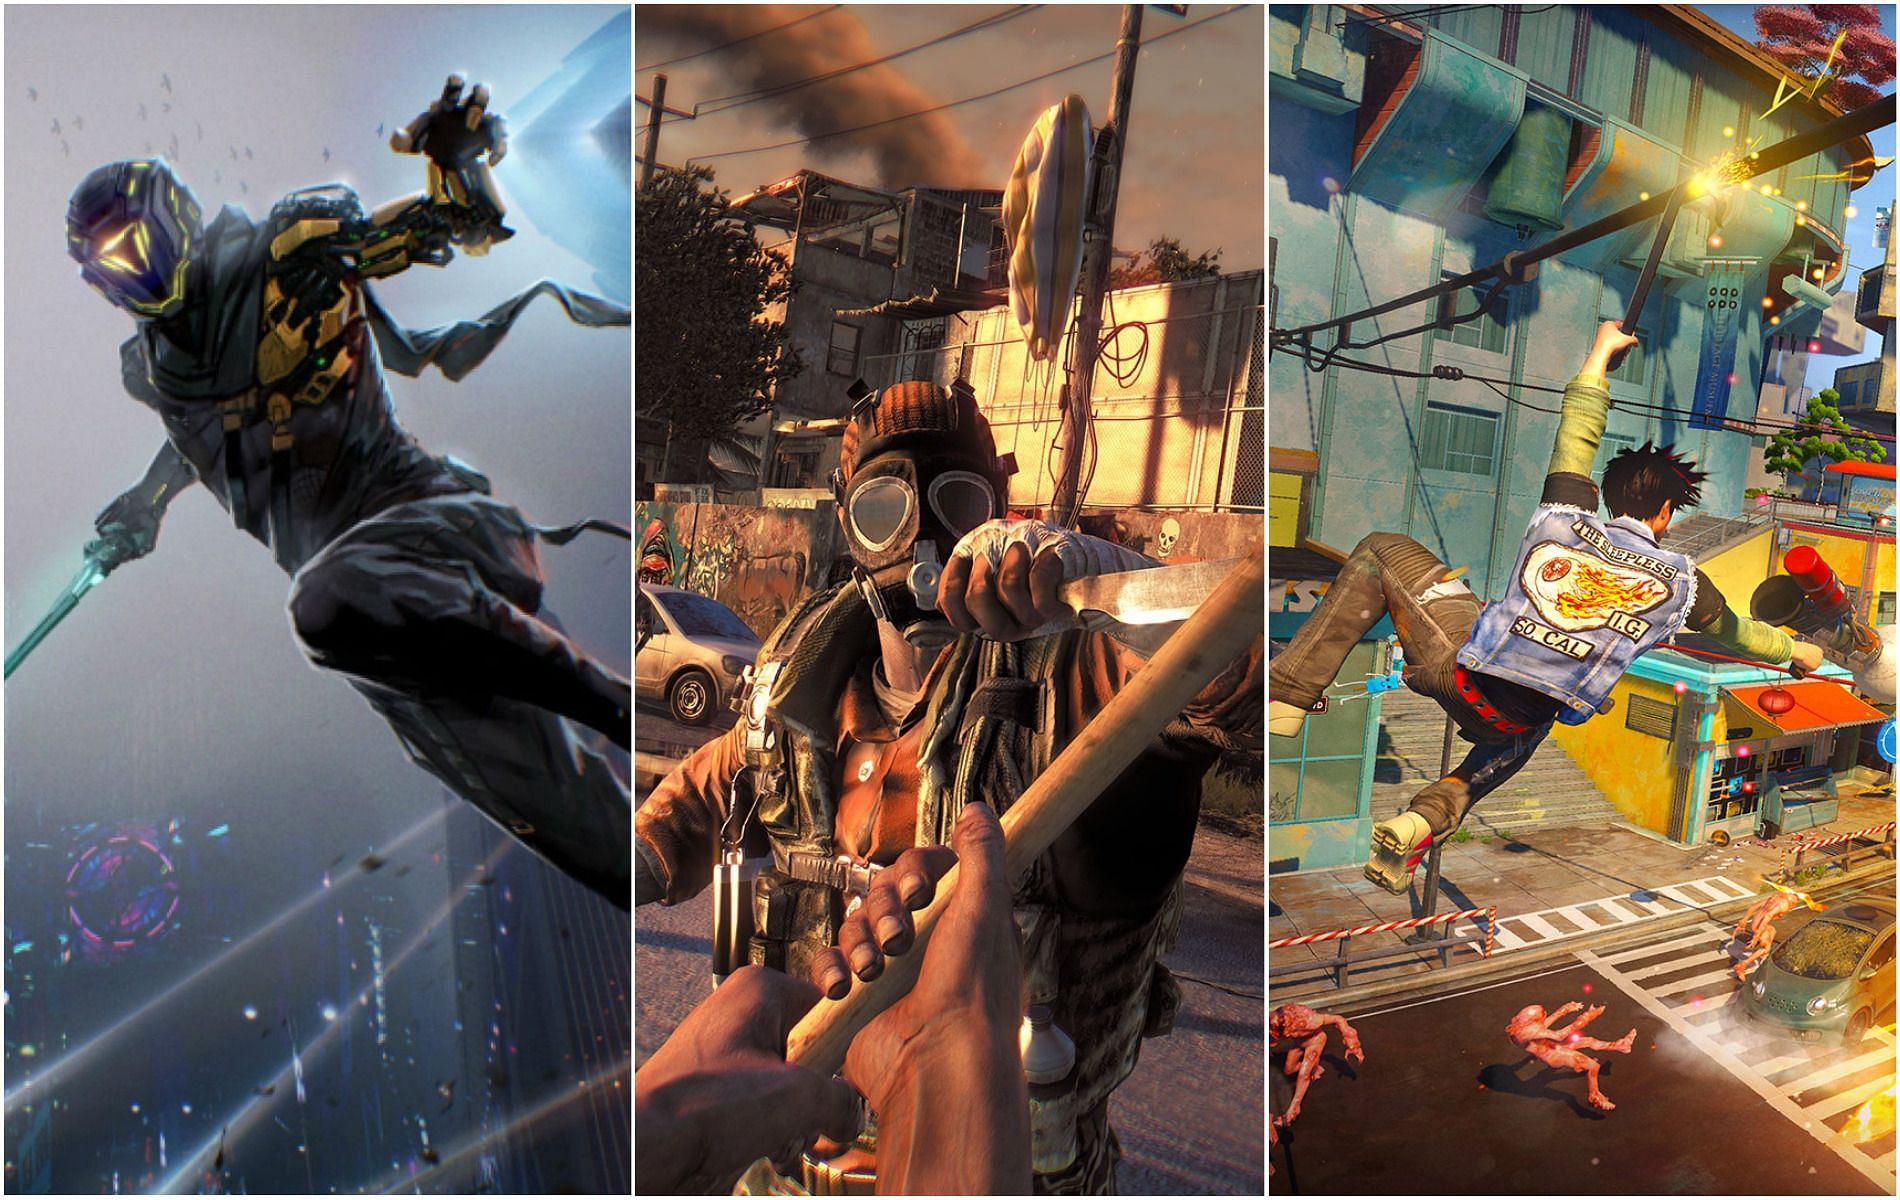 The traversal and parkour systems in these games will almost give you wings as you glide across its playground landscapes (Images via 505 Games/Techland/Microsoft)